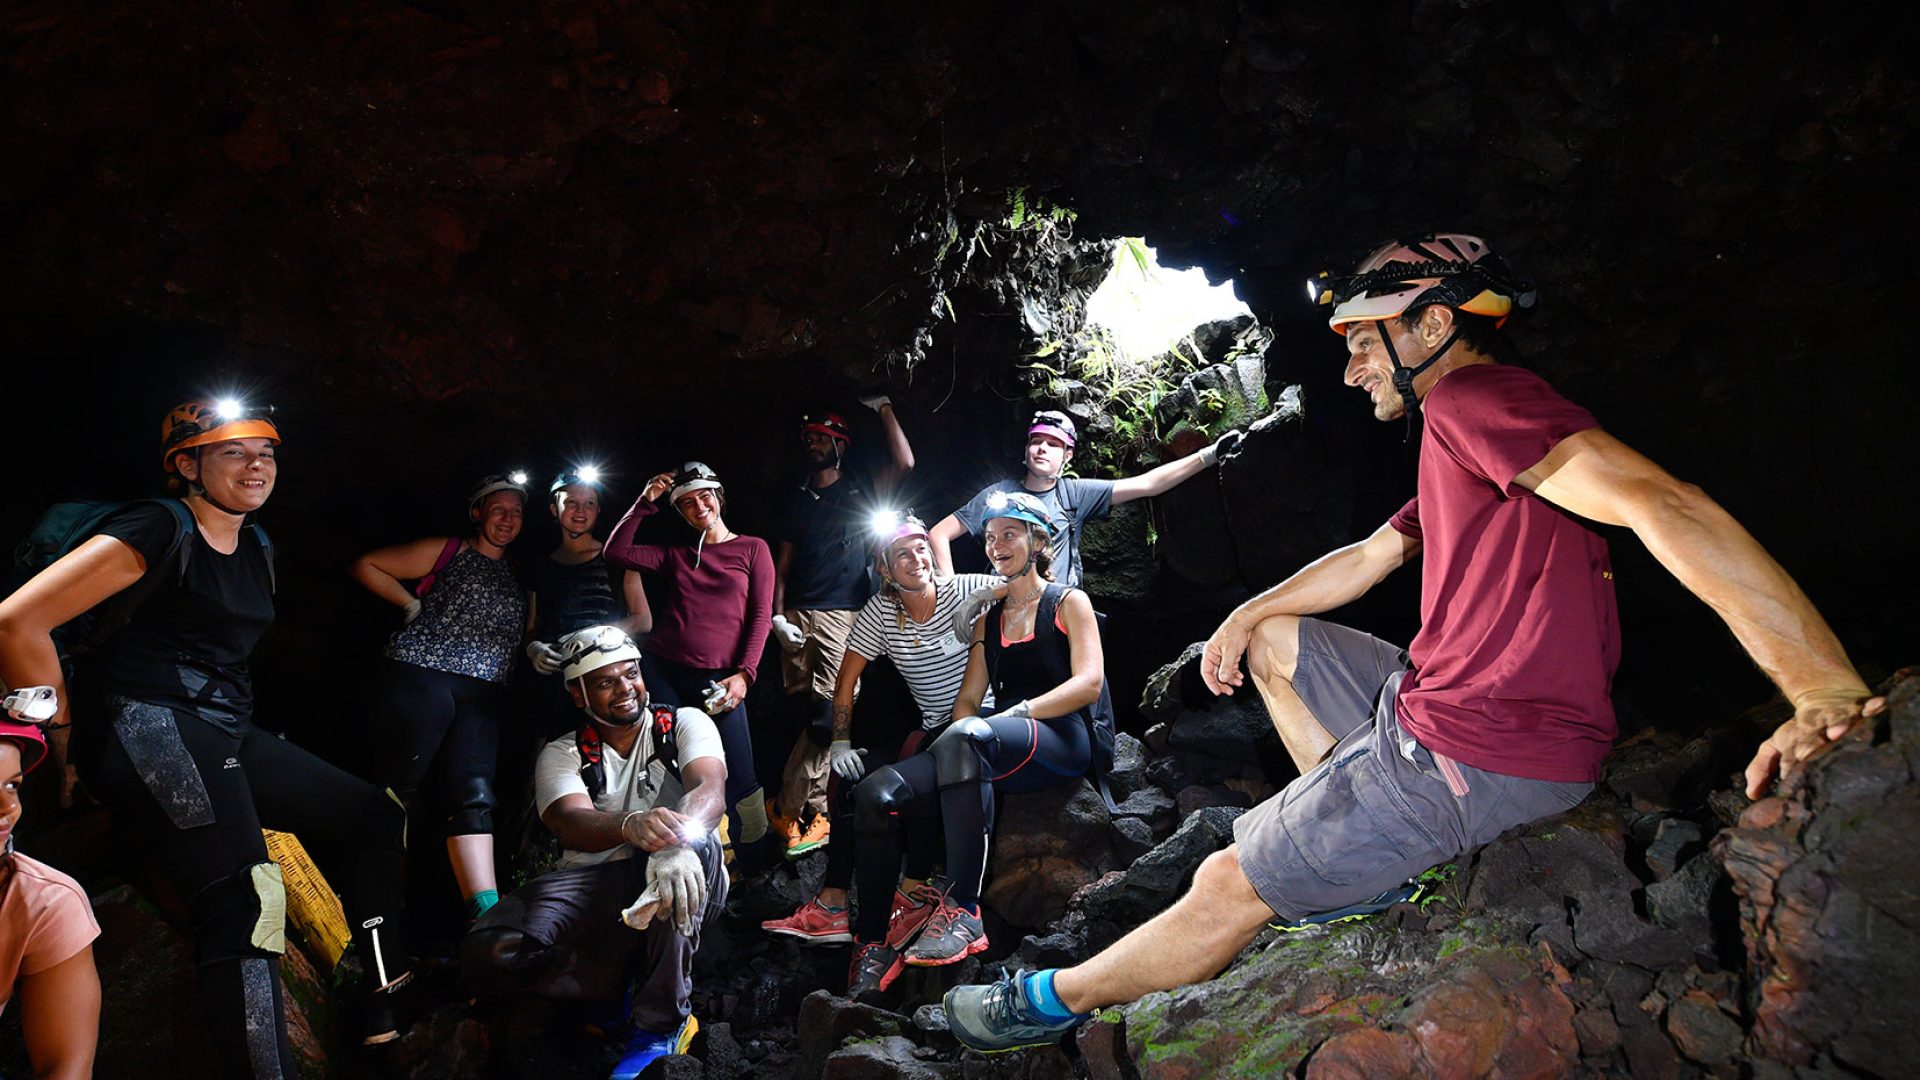 Discovery of the lava tunnels in Sainte-Rose